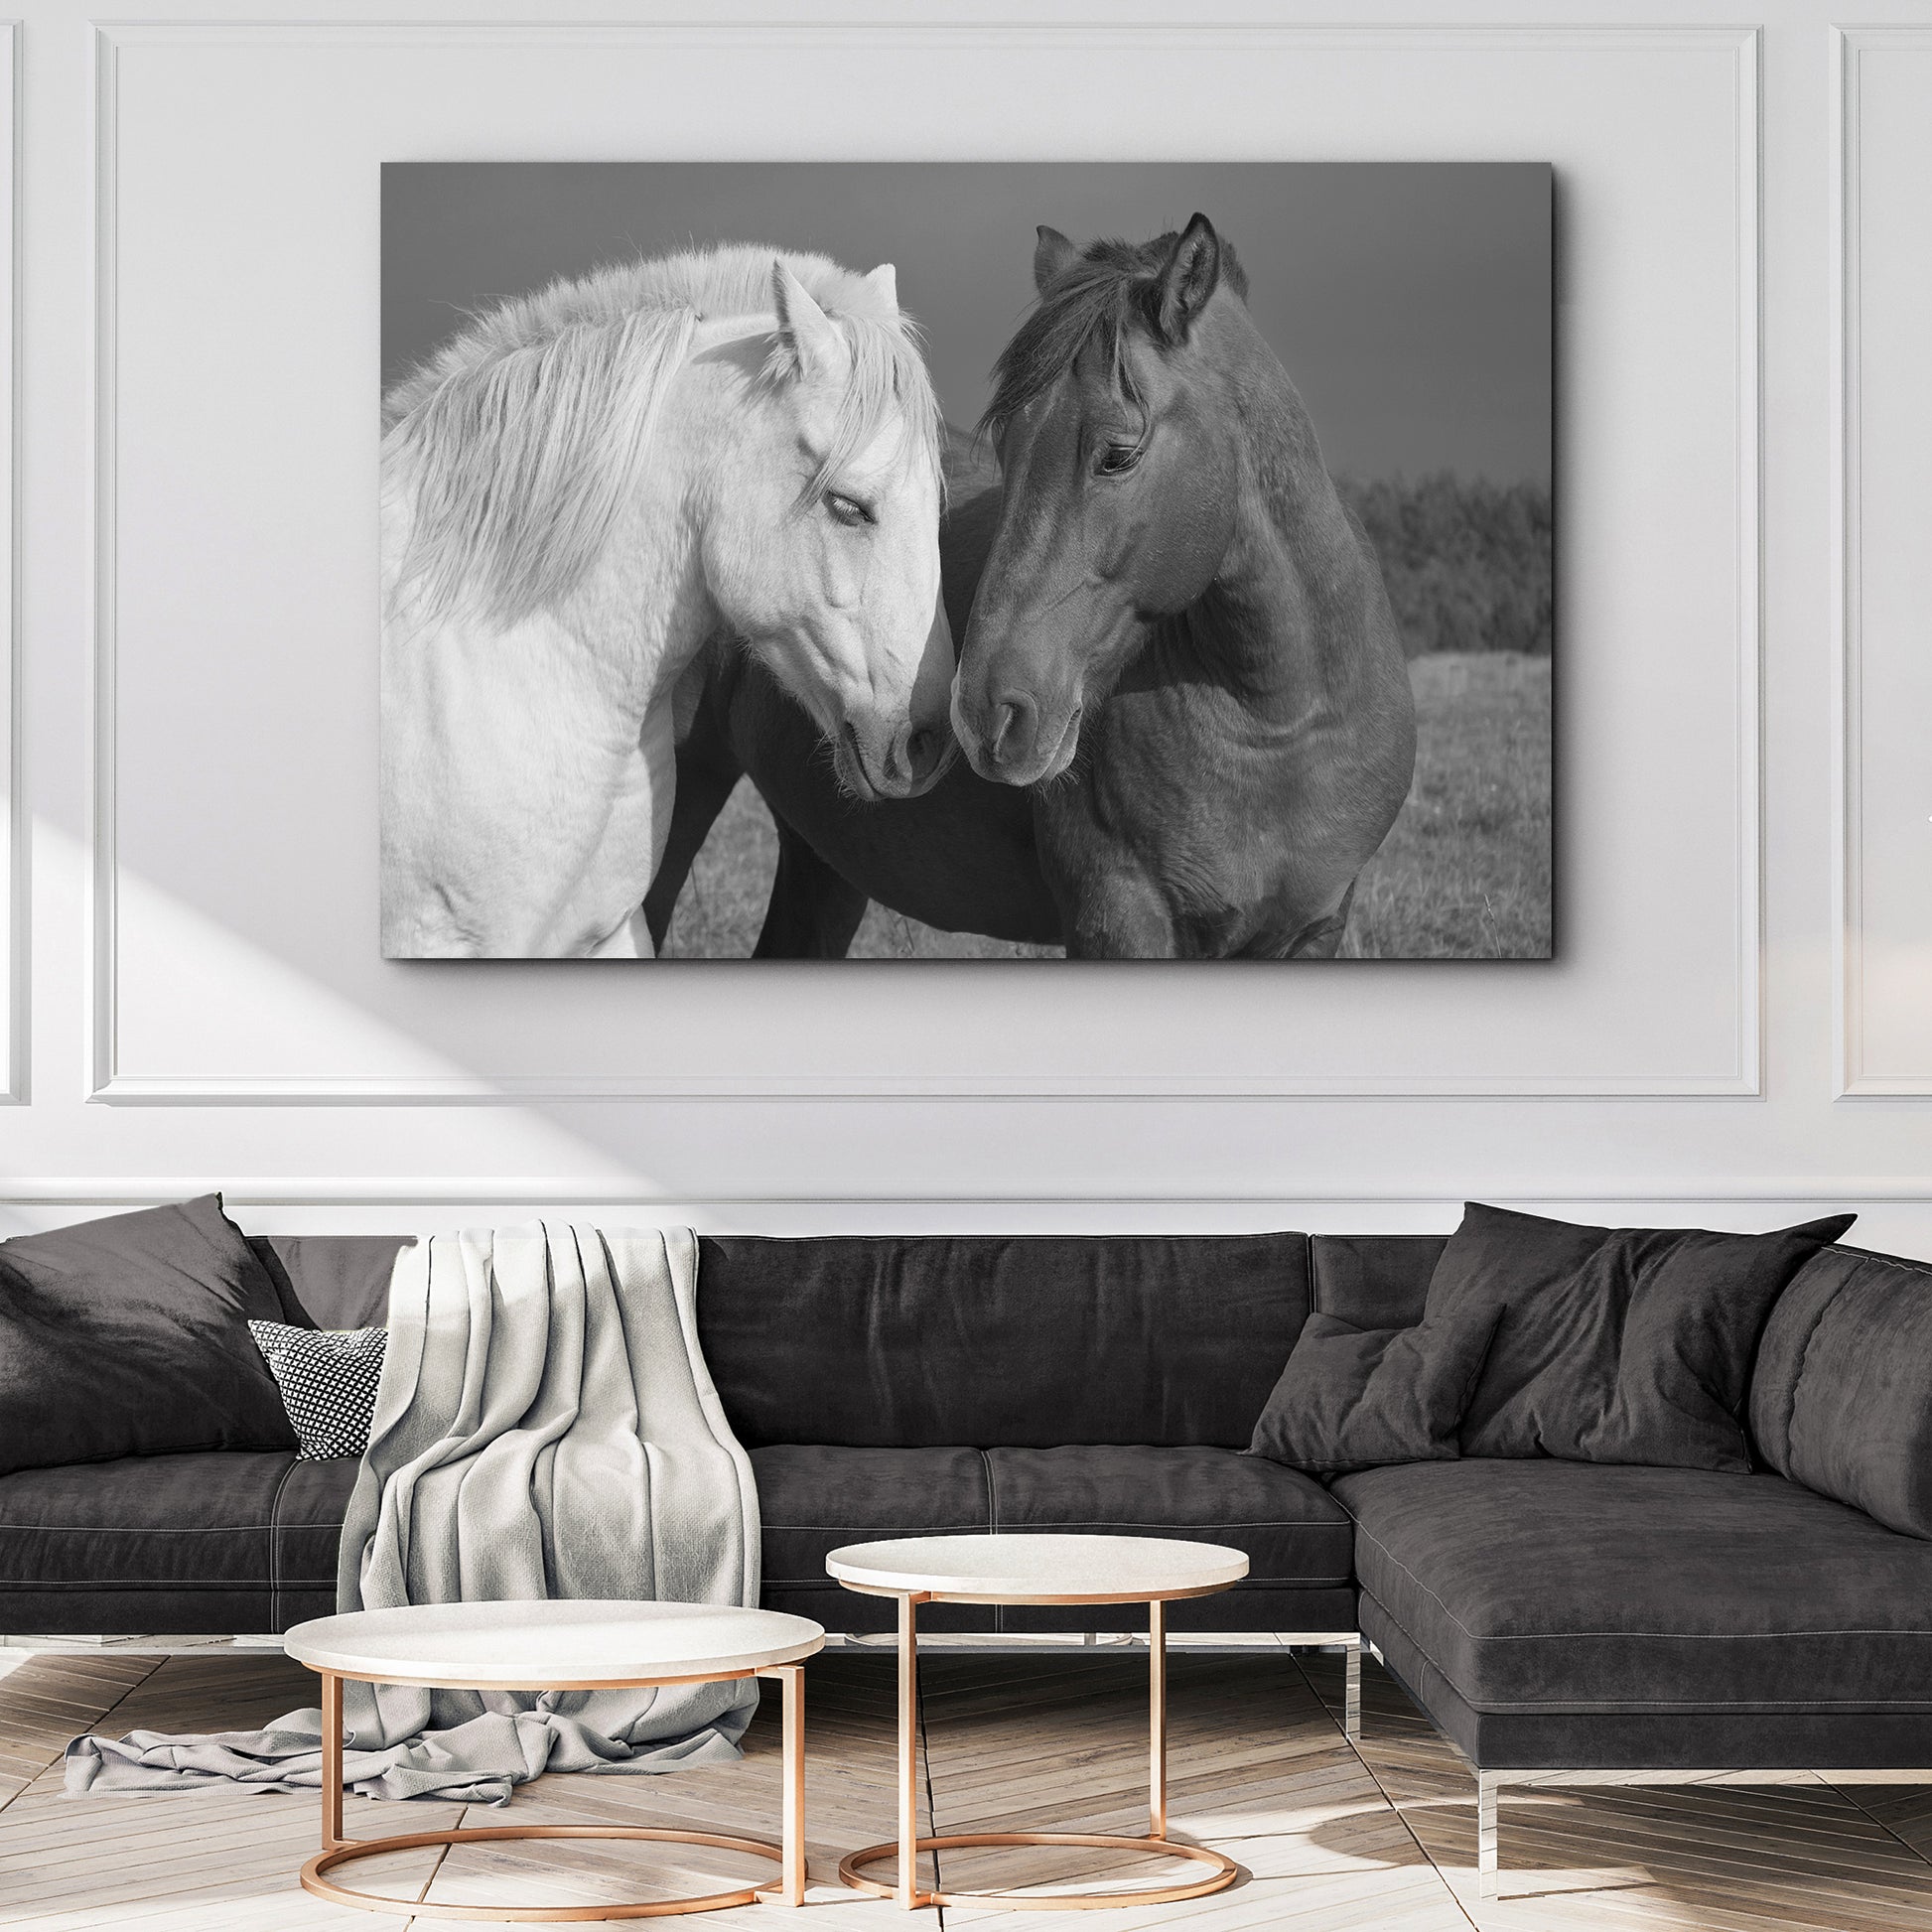 Horse Love Canvas Wall Art Style 2 - Image by Tailored Canvases